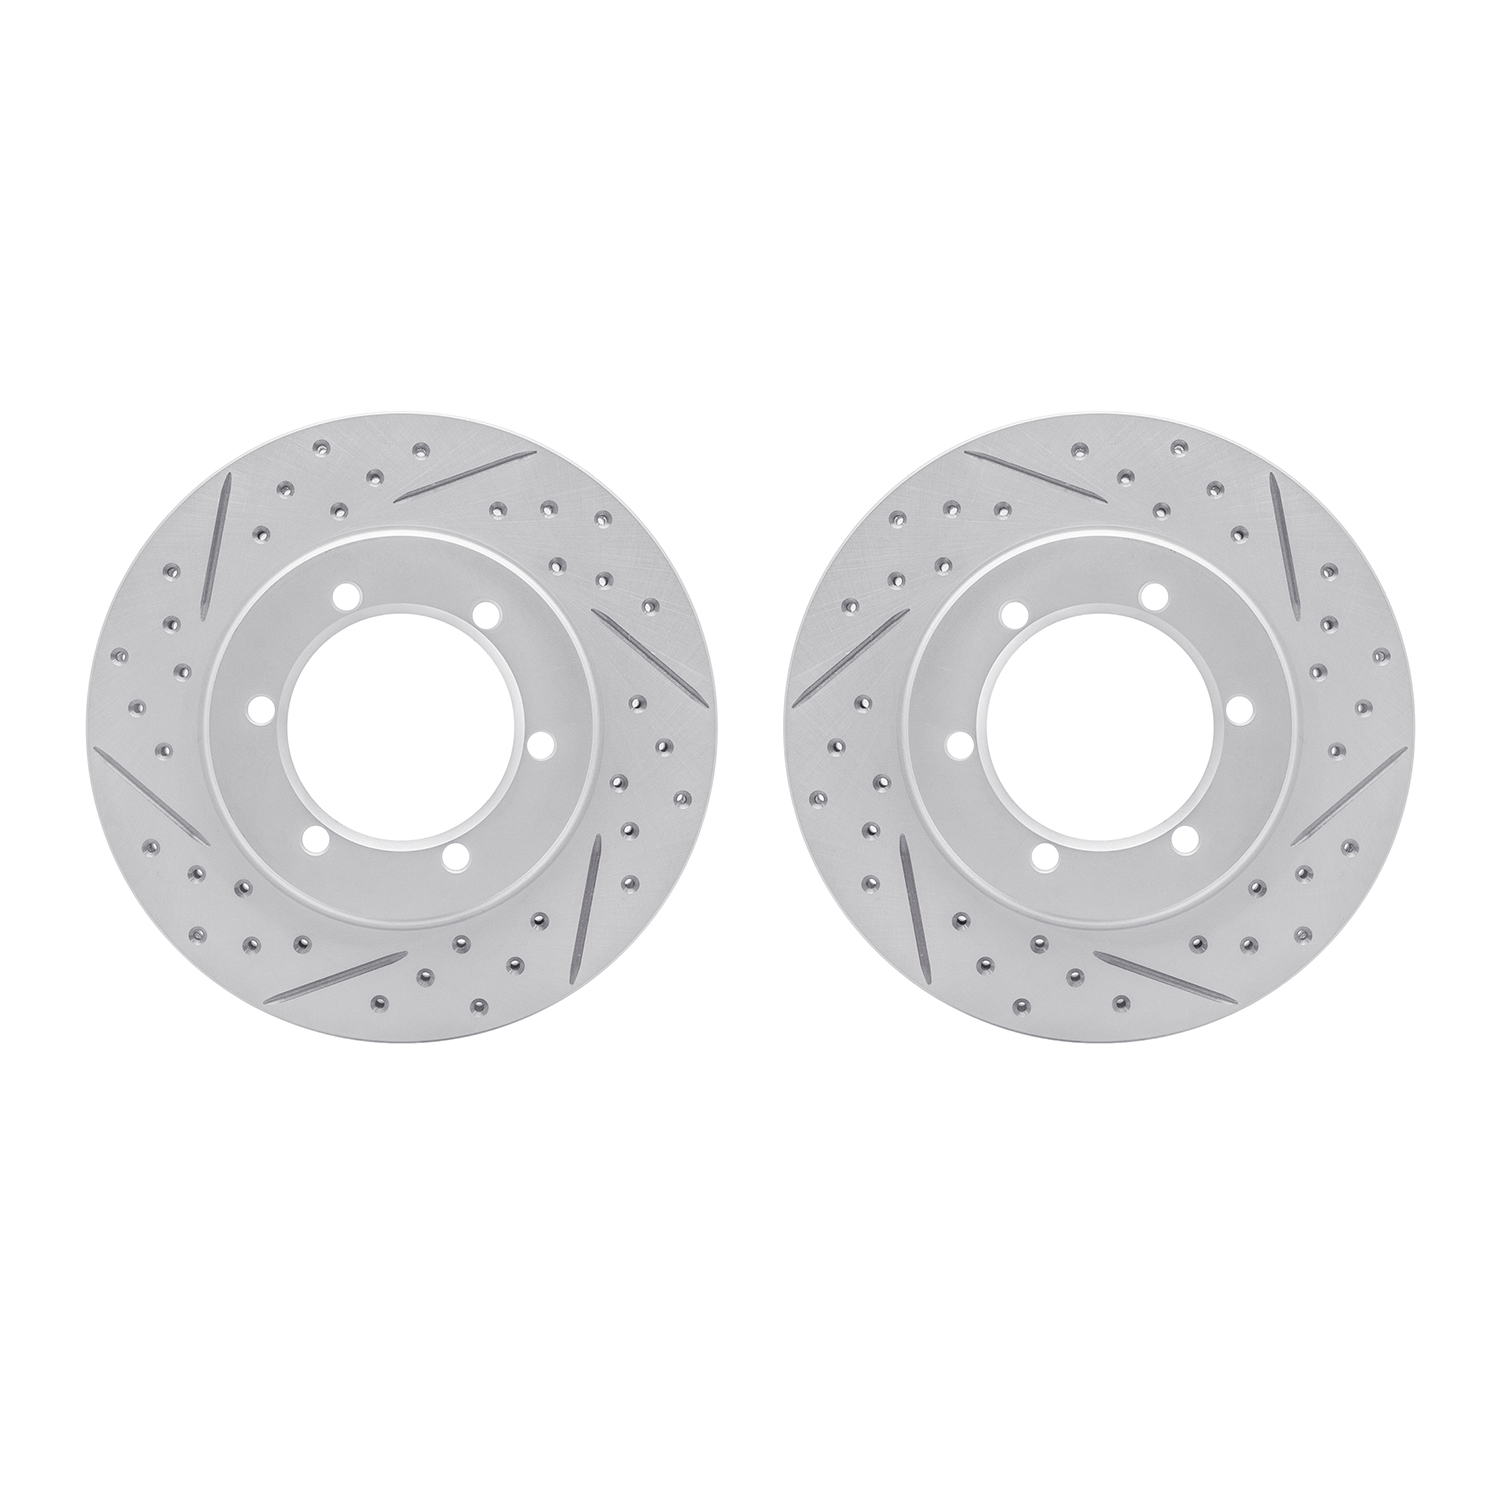 2002-67023 Geoperformance Drilled/Slotted Brake Rotors, 1998-2015 Infiniti/Nissan, Position: Front